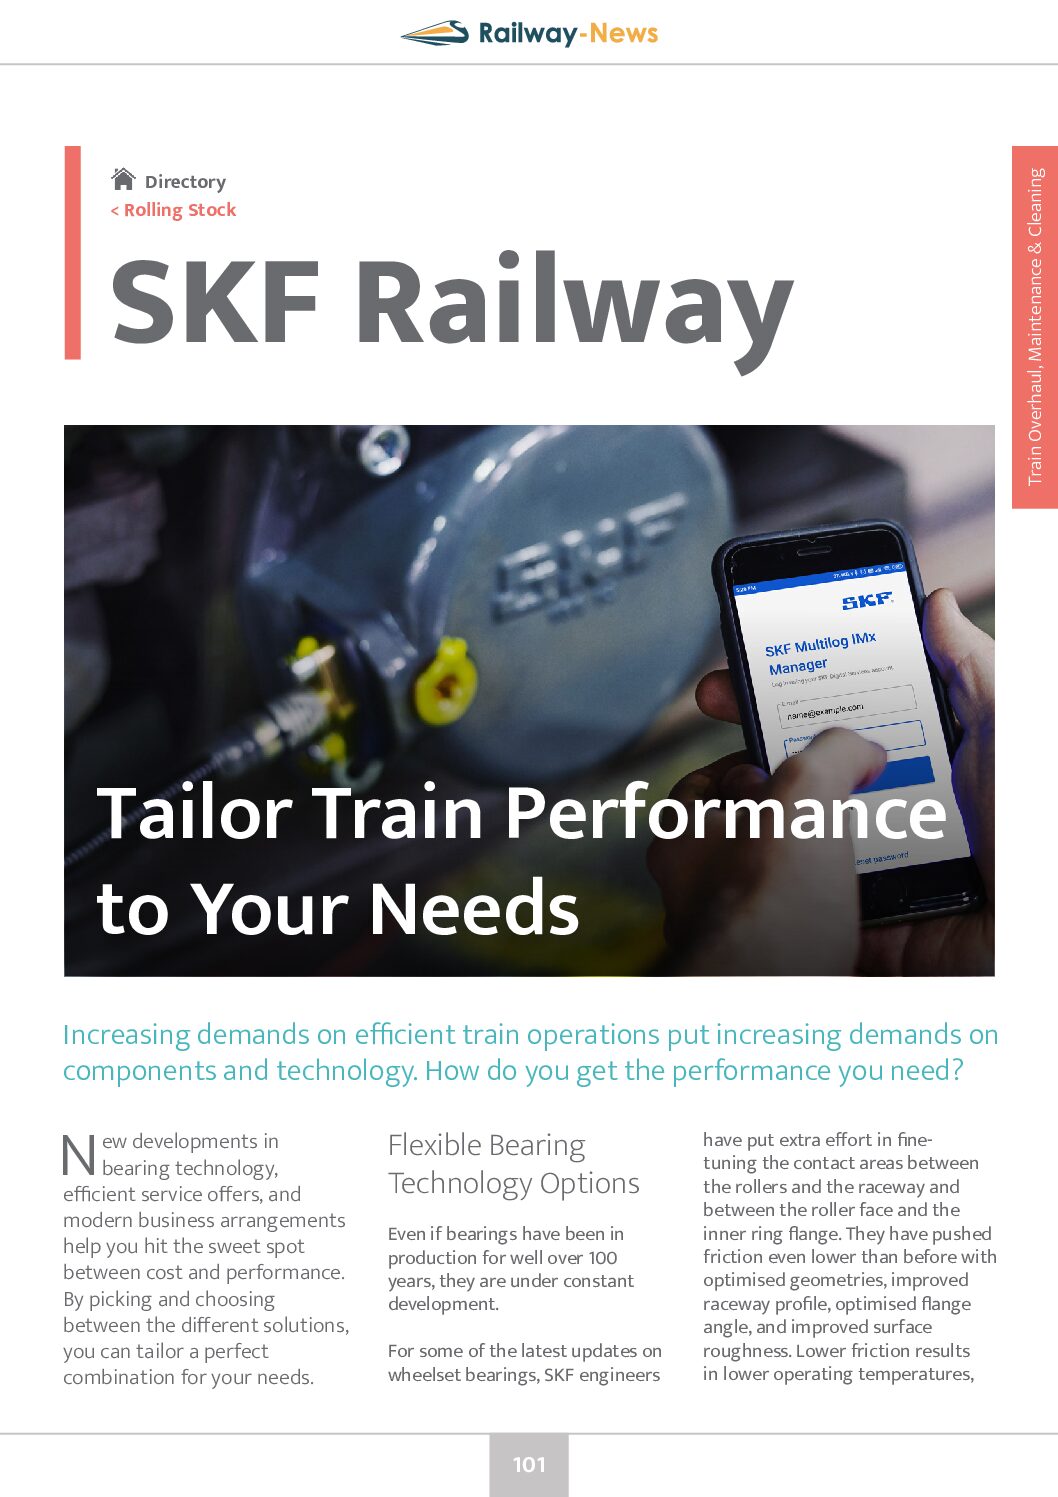 Tailor Train Performance to Your Needs